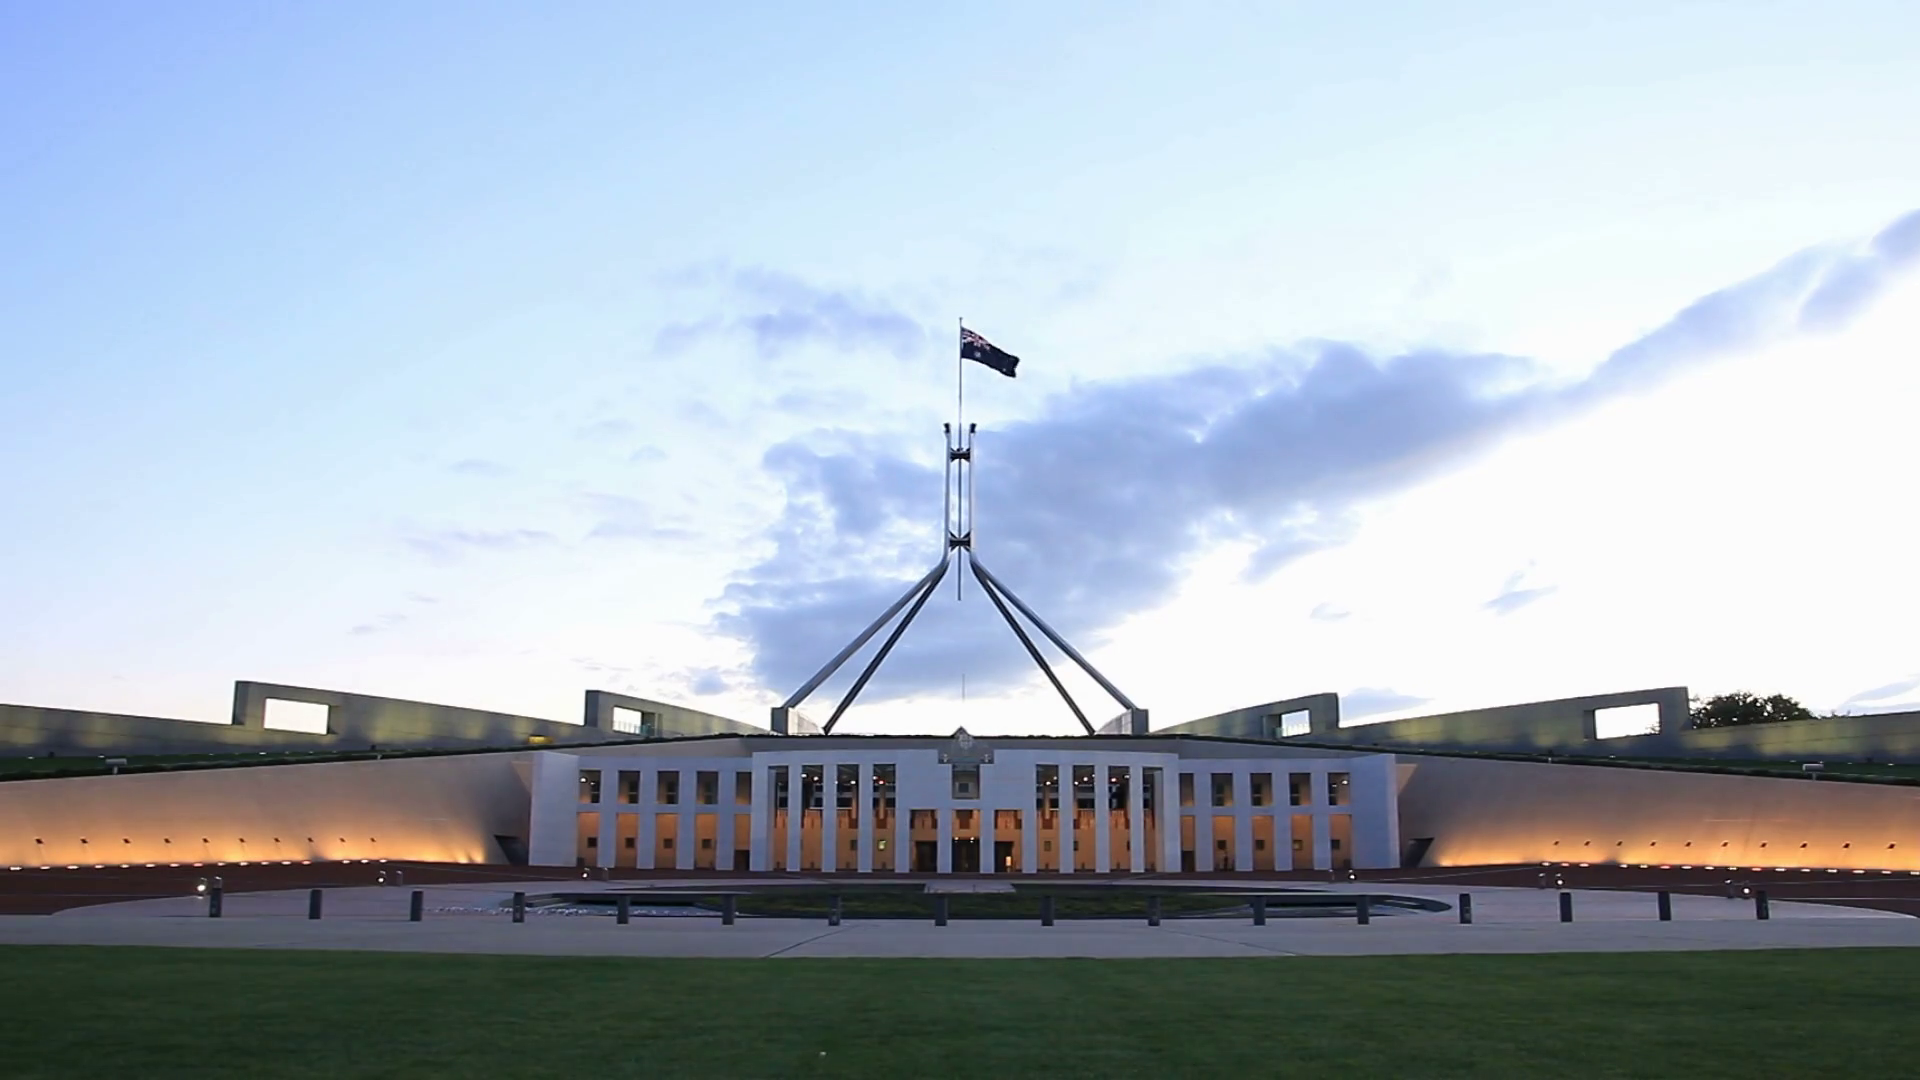 parliament-house-canberra-canberra-is-the-capital-city-of-australia-the-city-is-located-at-the-northern-end-of-the-australian-capital-territory-act_4jlvlvjq_thumbnail-1080_01